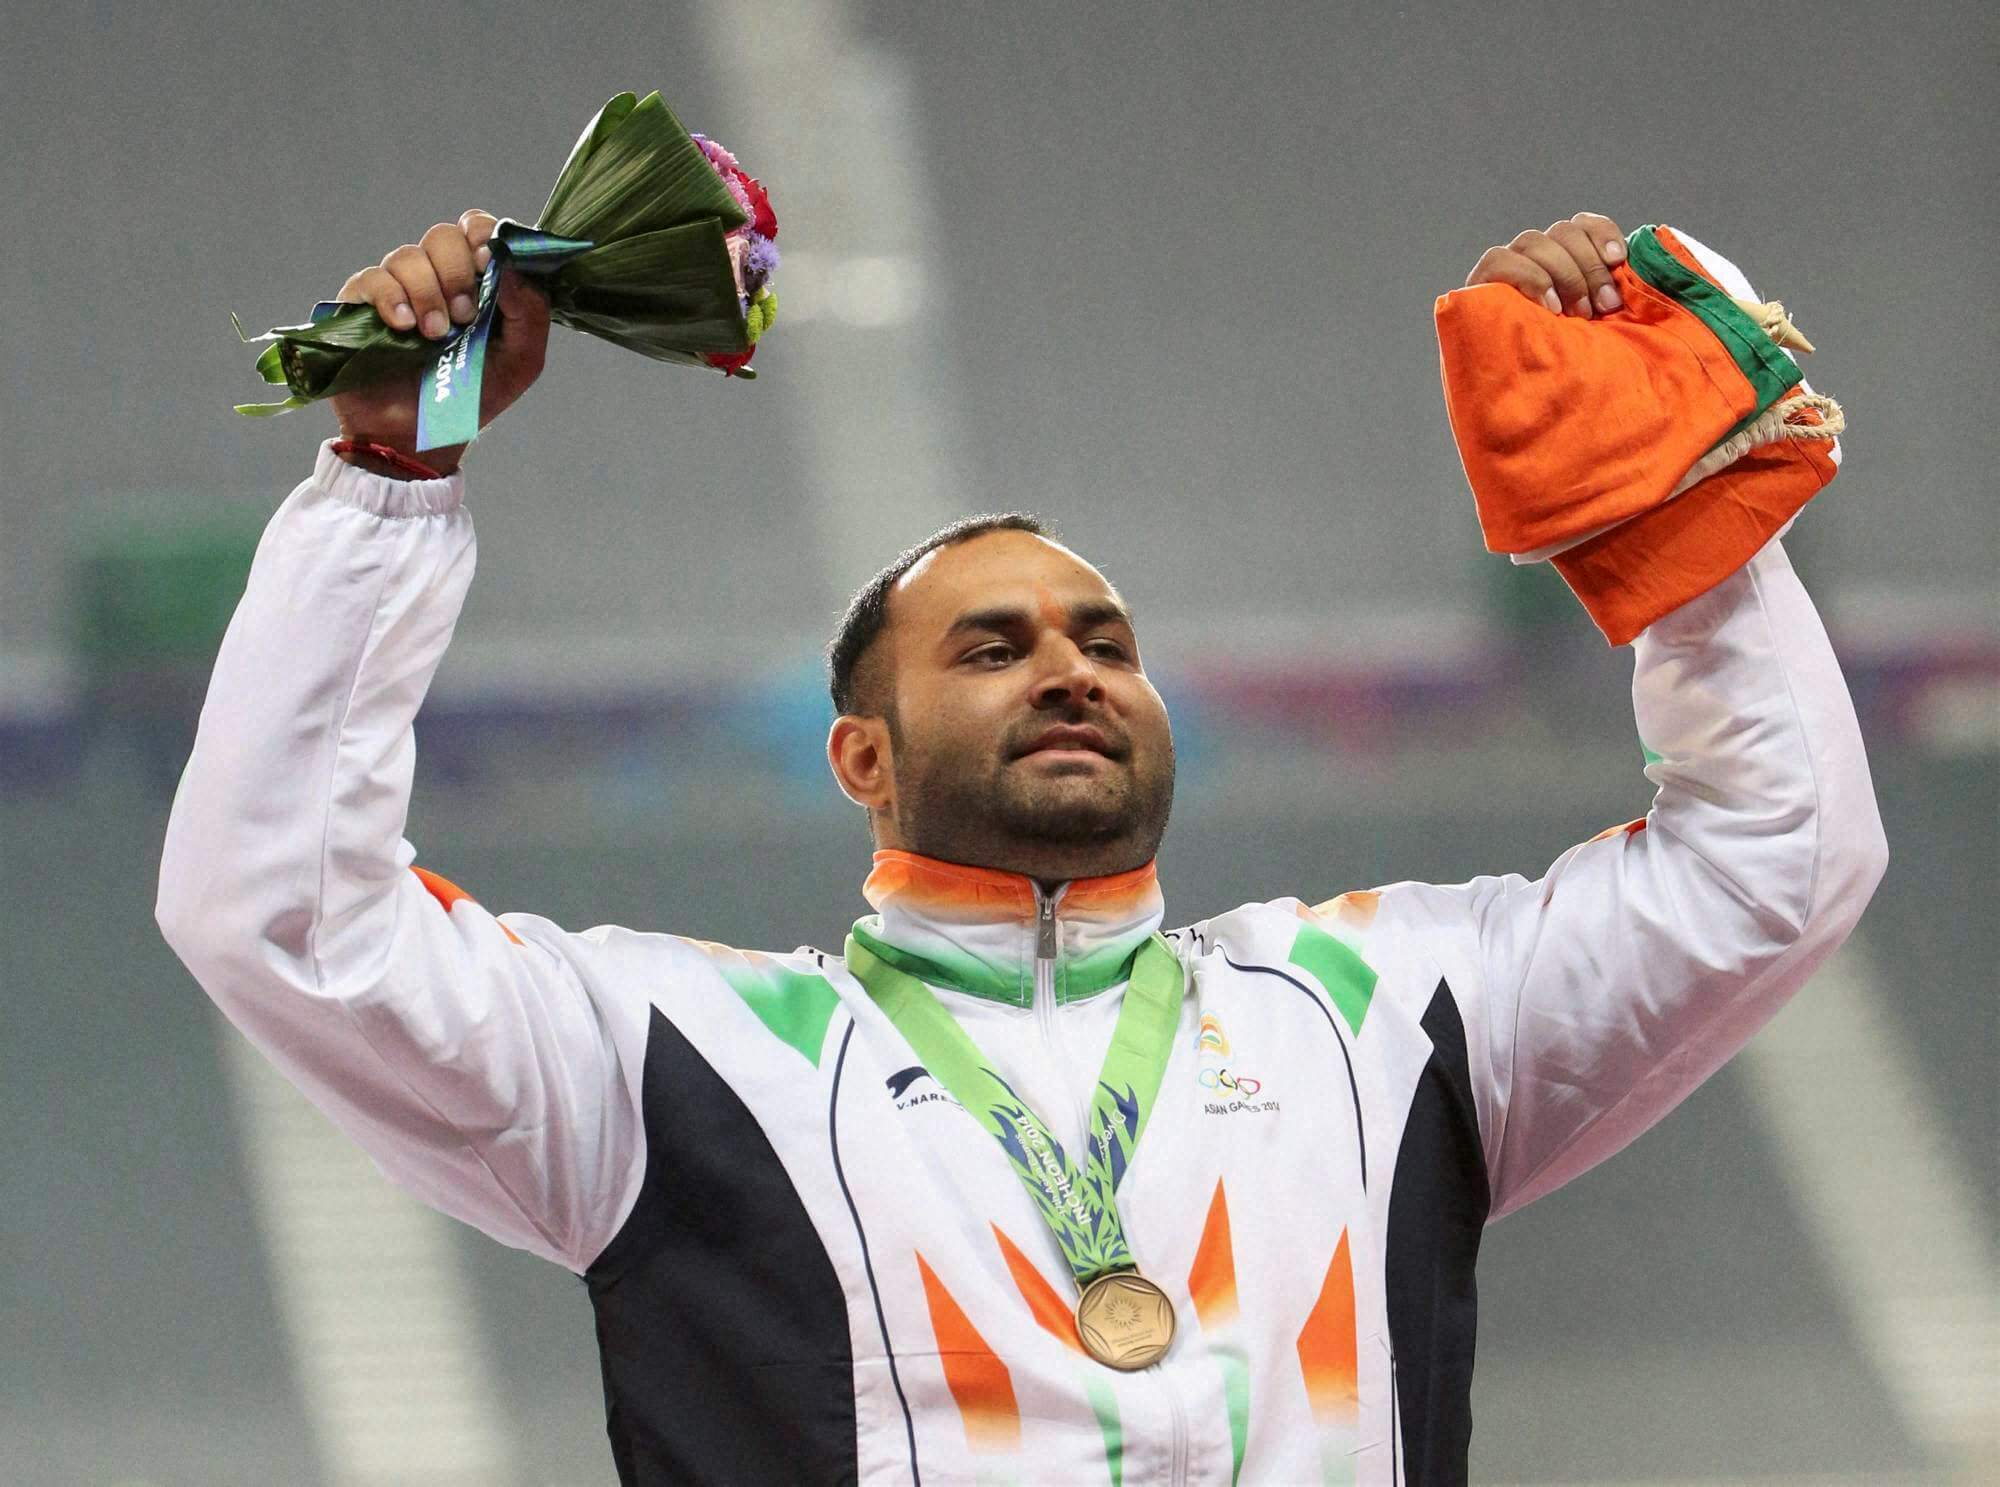 Narsingh And Inderjeet Are Just Two Of 687 Indian Athletes Banned For Doping Since 2009